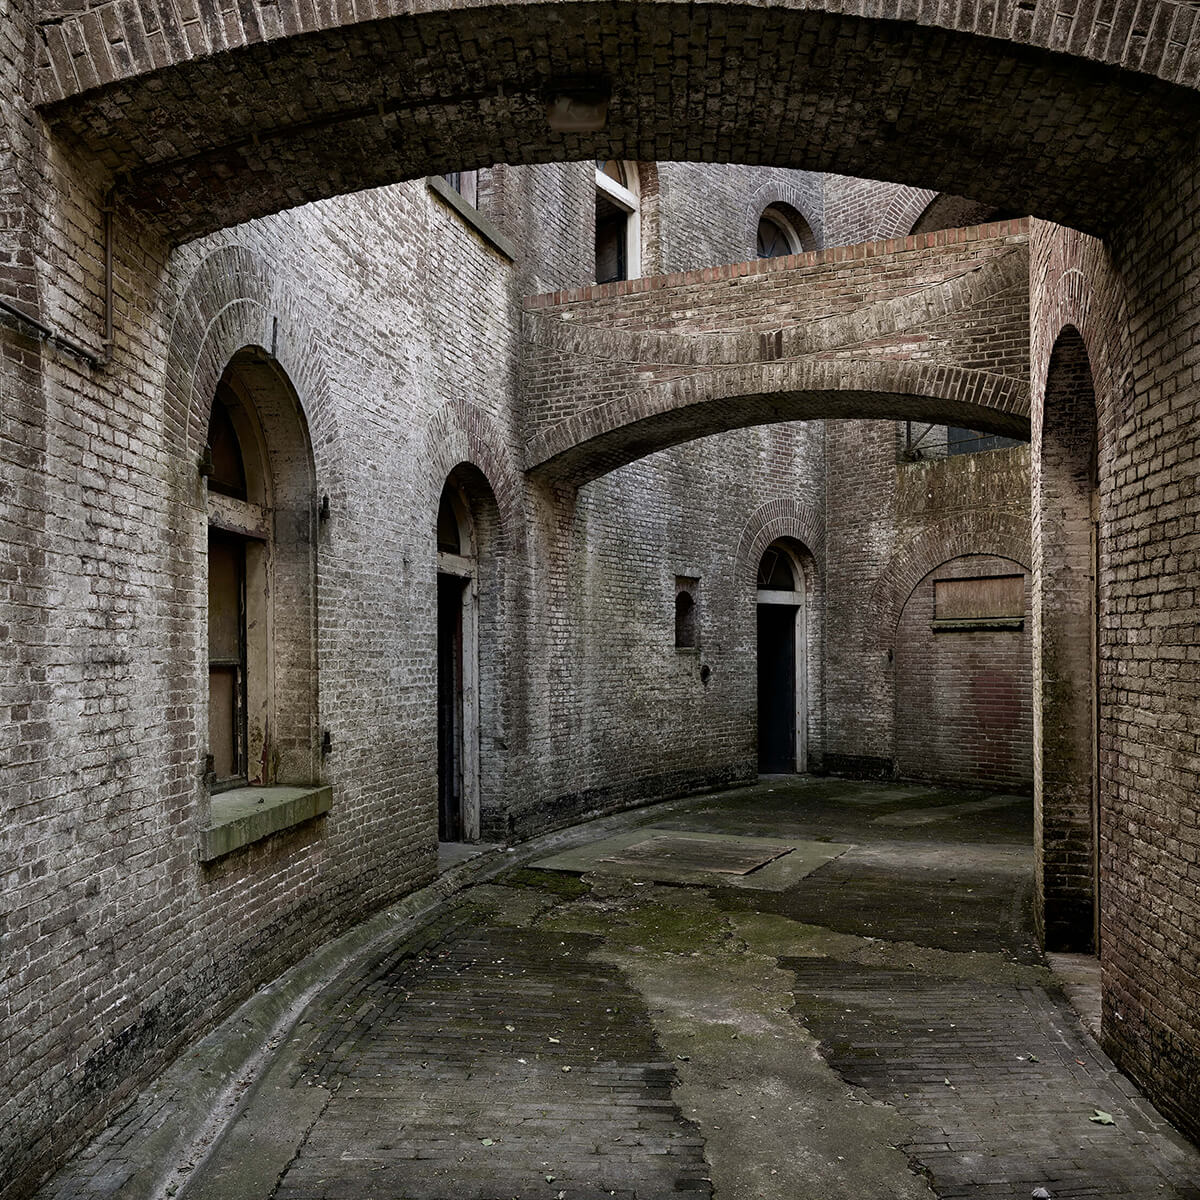 Courtyard with arches